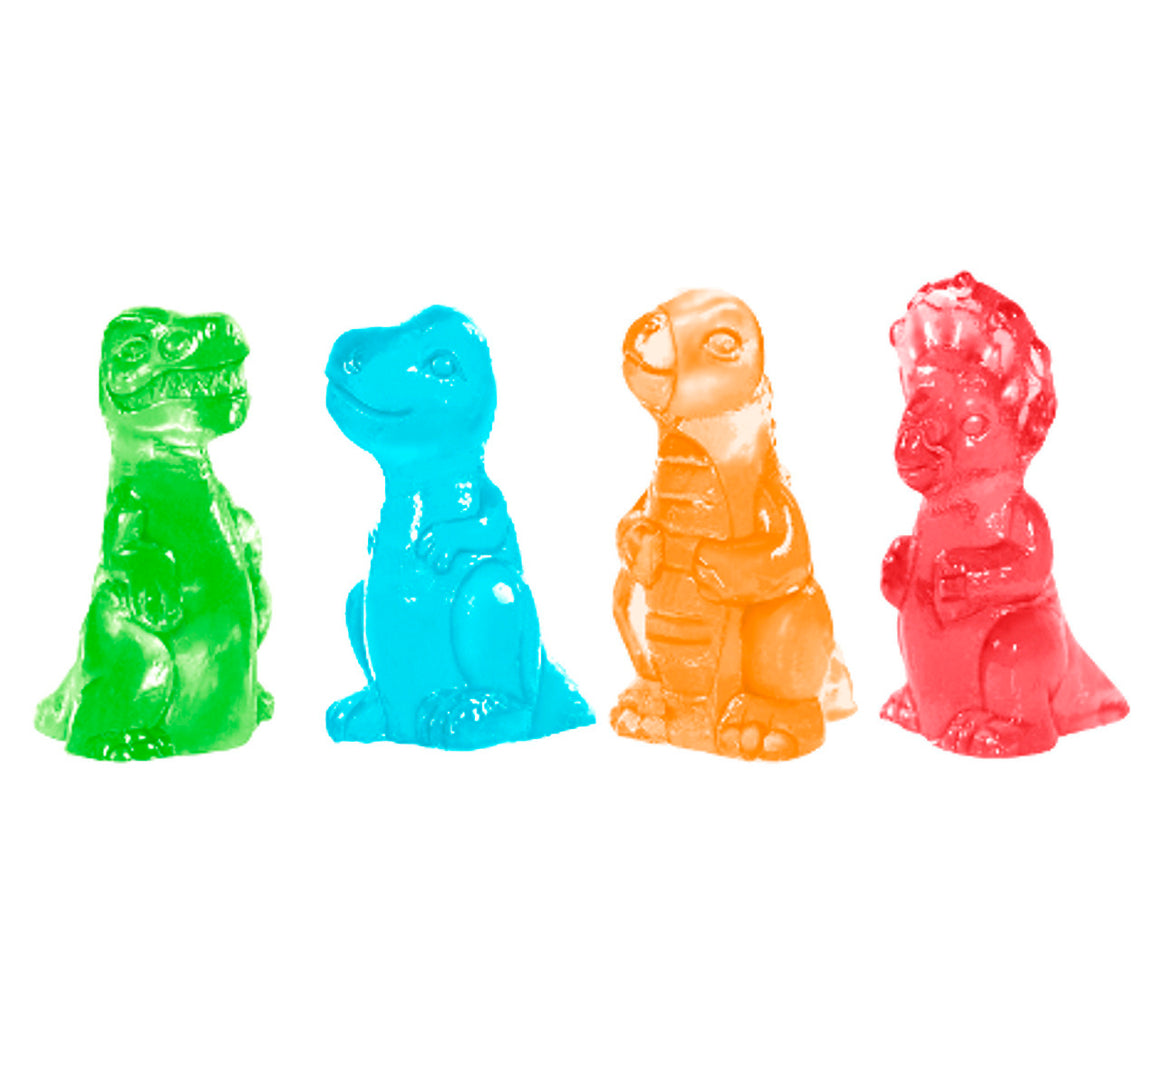 All City Candy 4D Gummy Dinosaurs 2.2 lb. Bulk Bag- For fresh candy and great service, visit www.allcitycandy.com